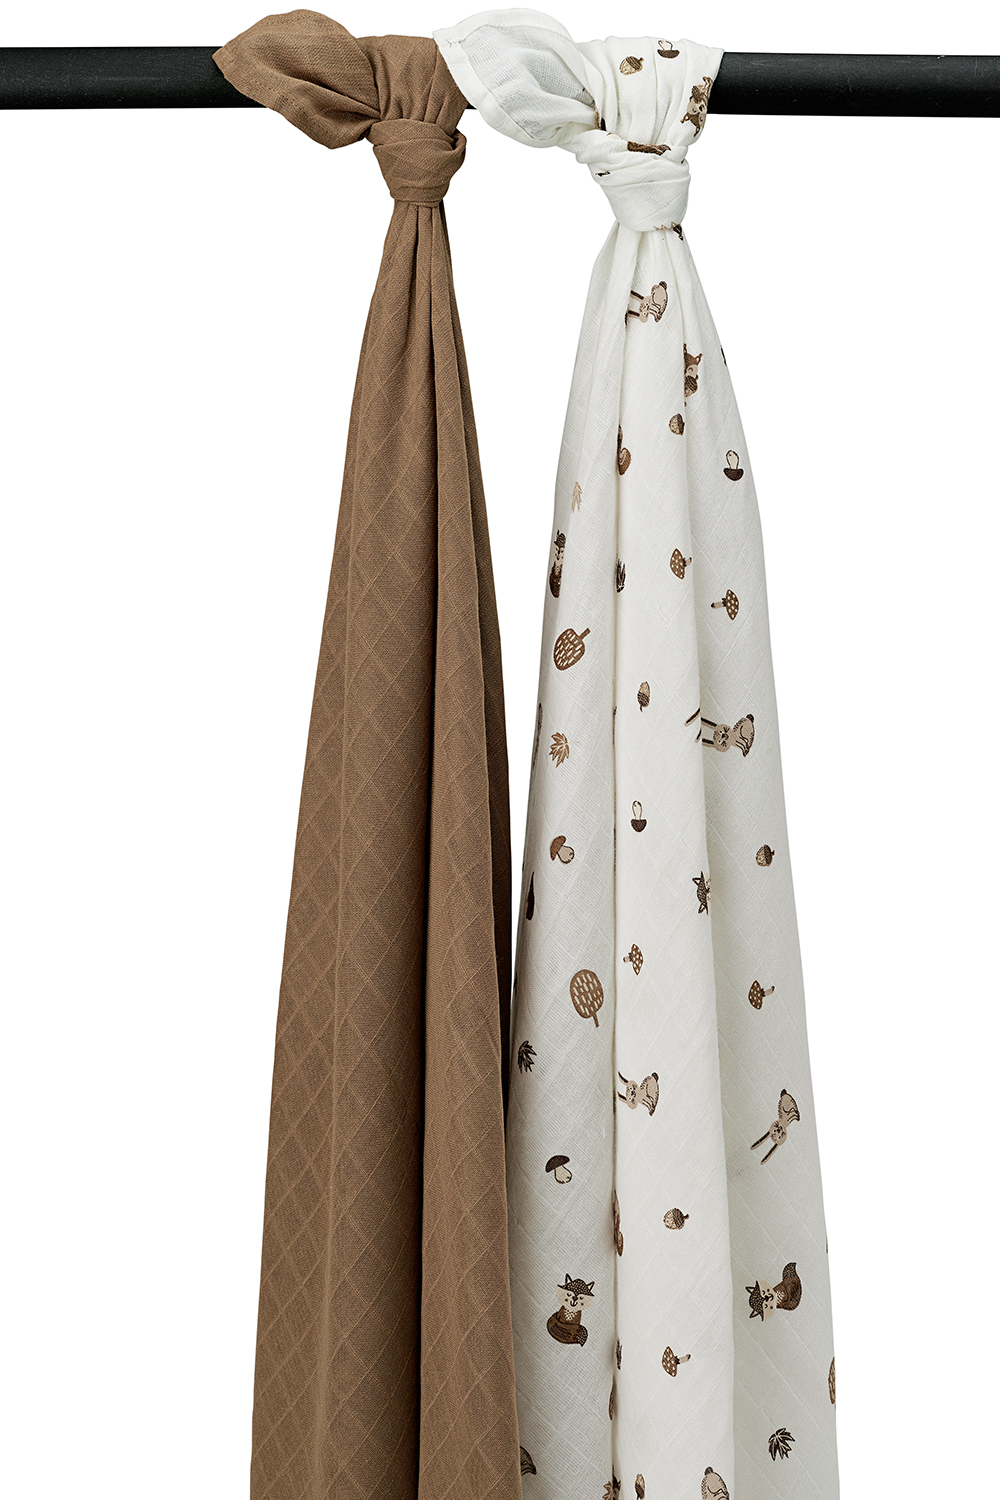 Swaddle 2-pack muslin Forest Animals - toffee - 120x120cm